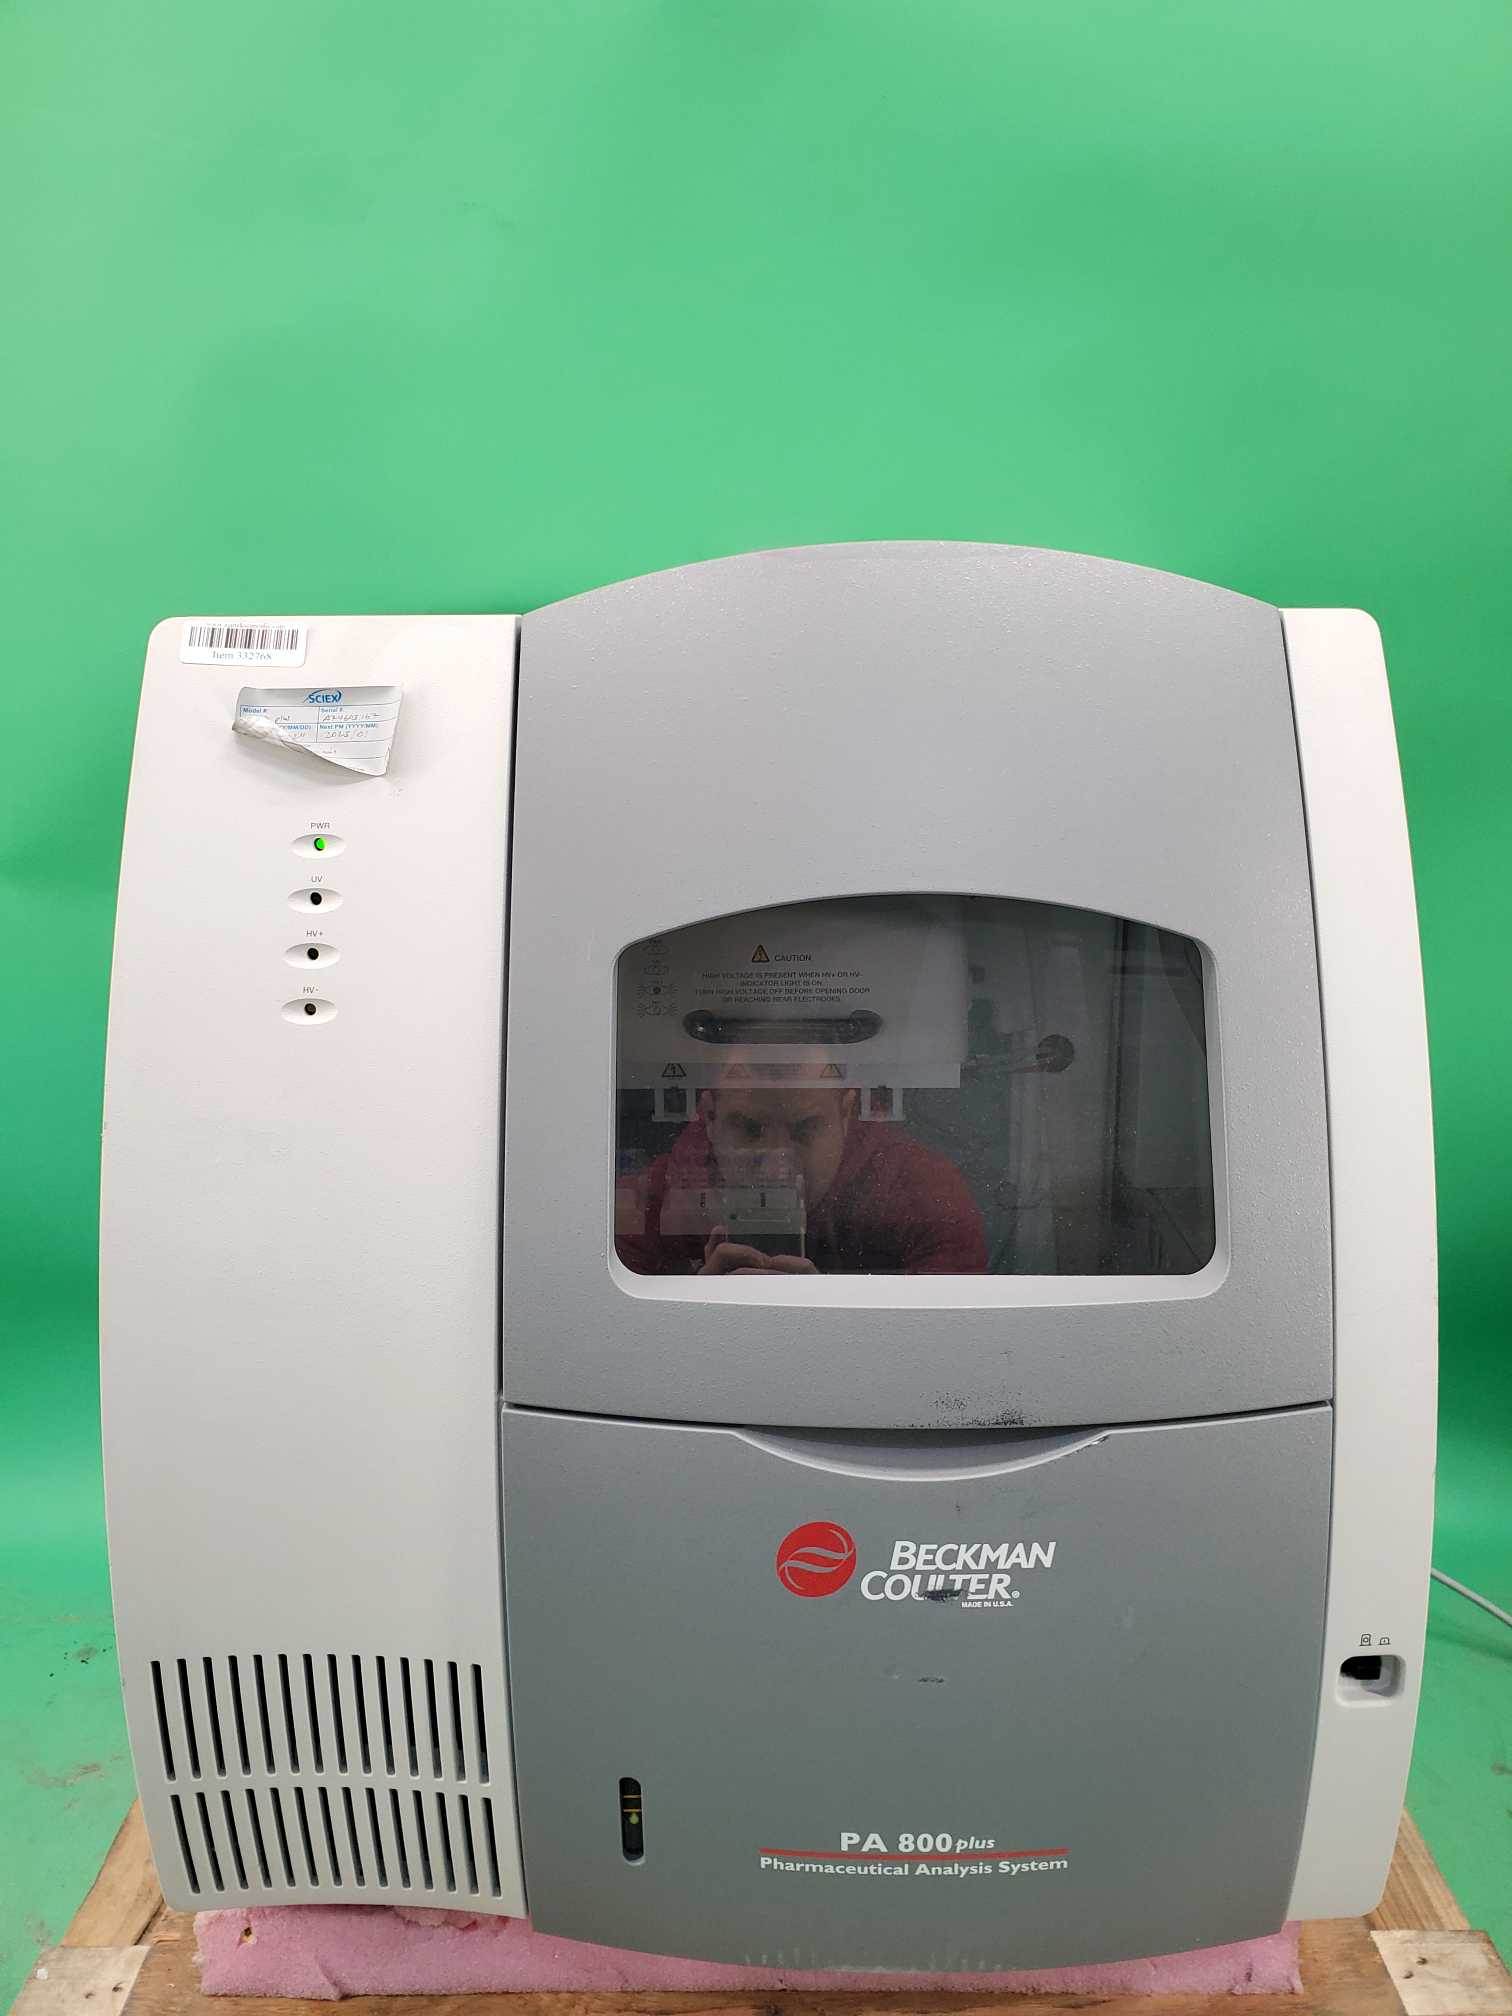 Beckman Coulter PA 800 Plus Pharmaceutical Analysis System